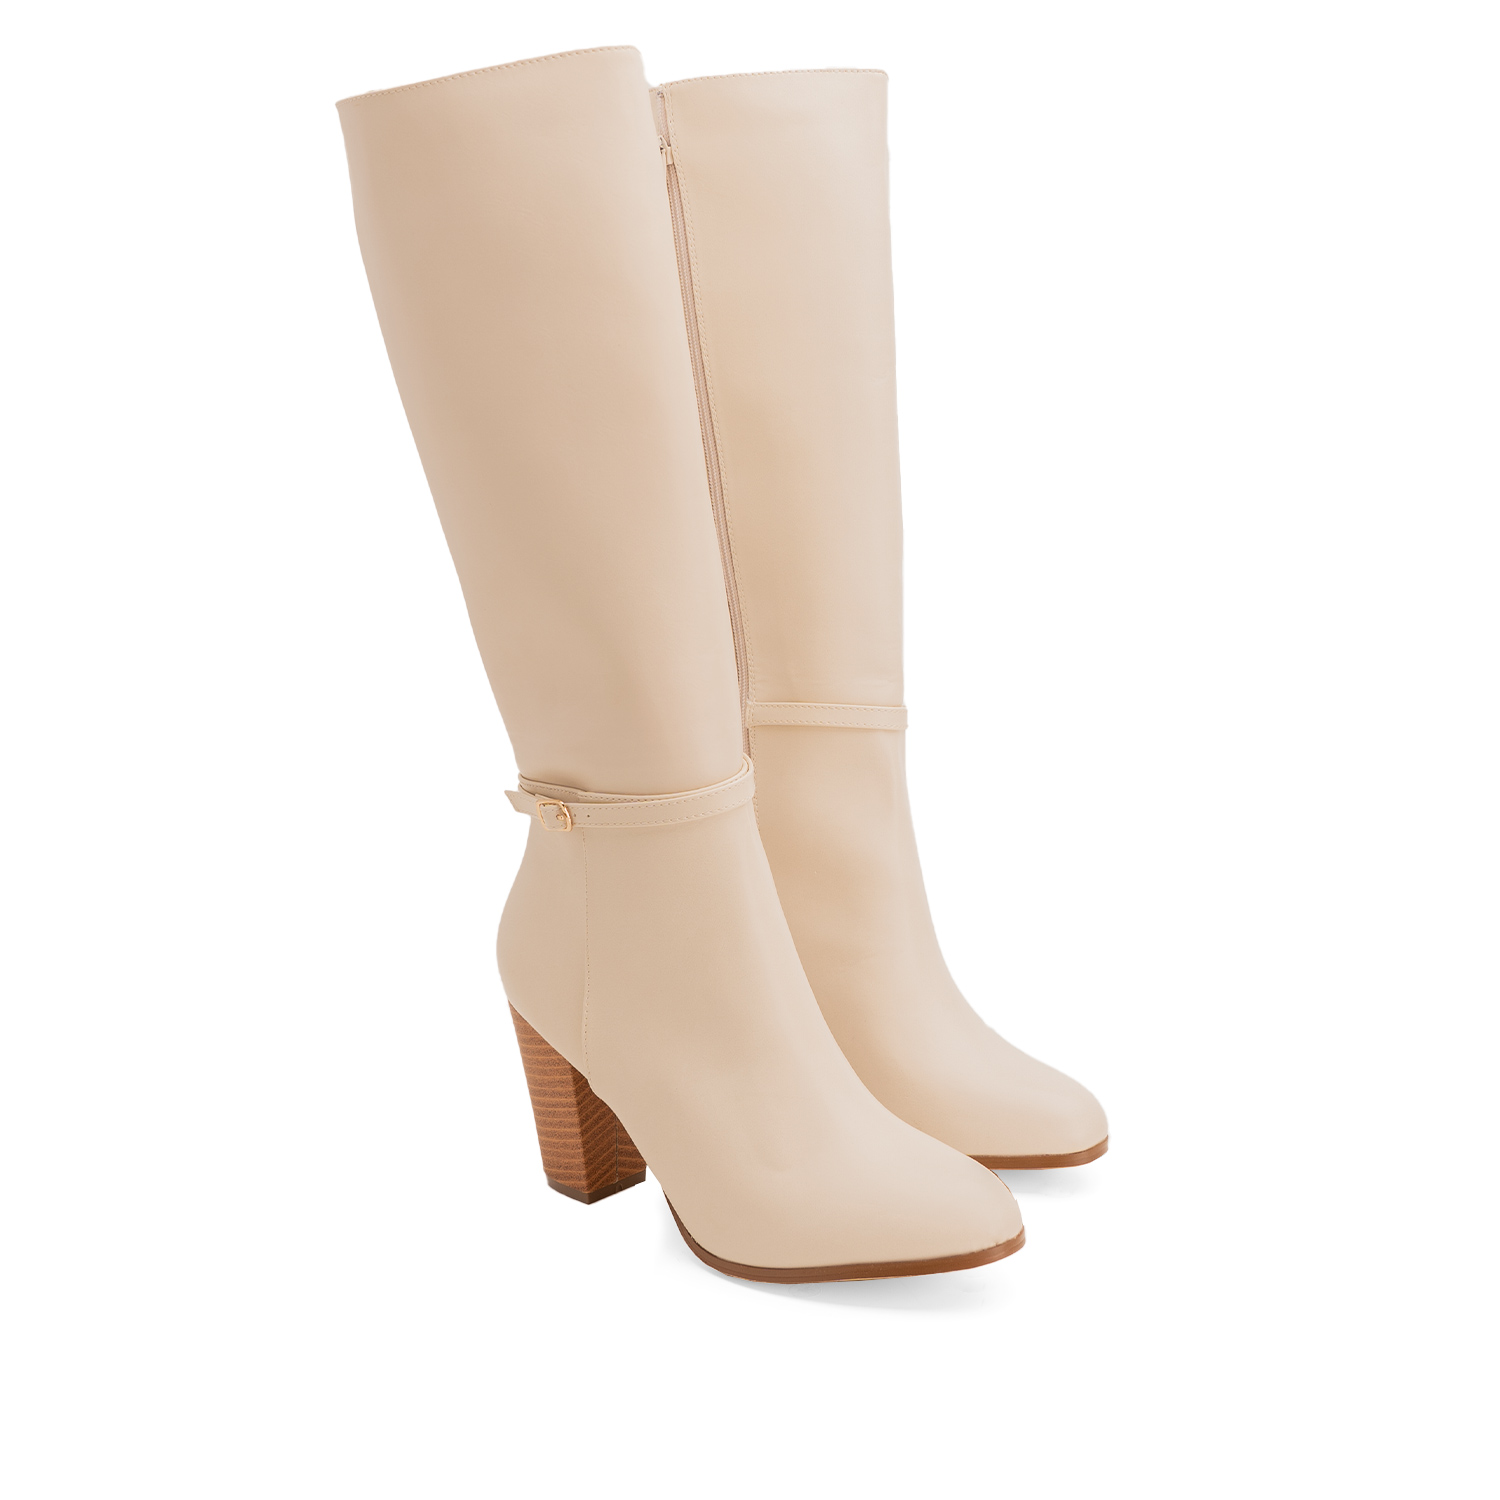 Heeled boots in ivory faux leather with buckled strap detail